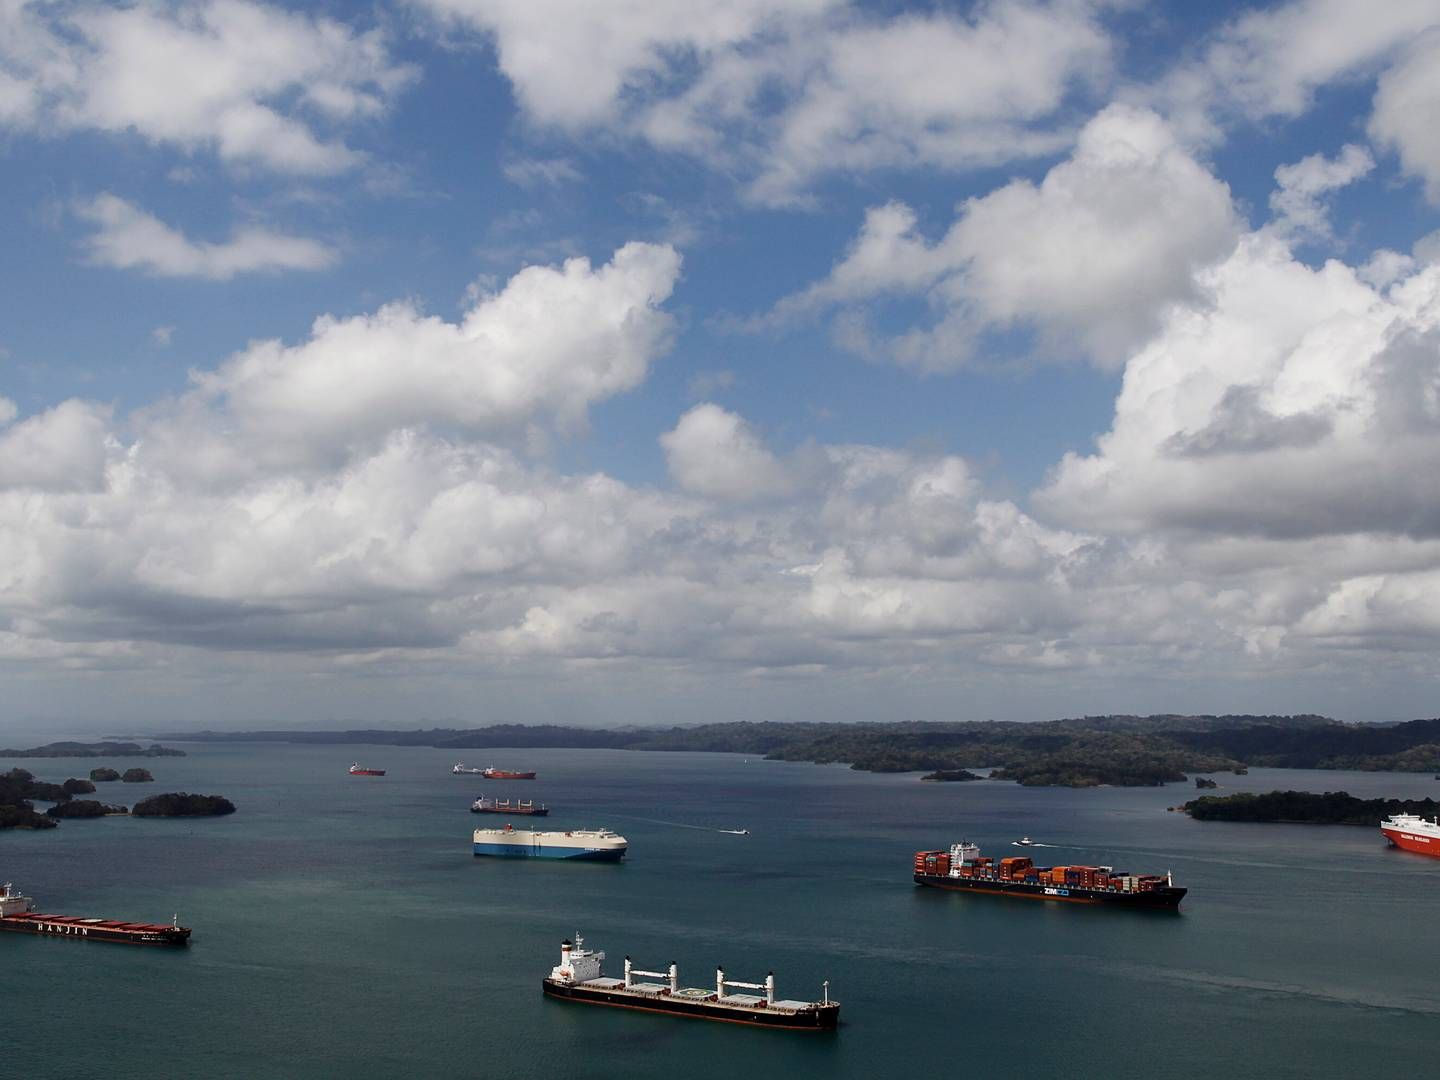 Although the drought in Gatun Lake, which supplies the Panama Canal with water, continues to cause problems for the canal's traffic, the number of ships queuing is lower than last year. | Photo: Carlos Jasso/Reuters/Ritzau Scanpix